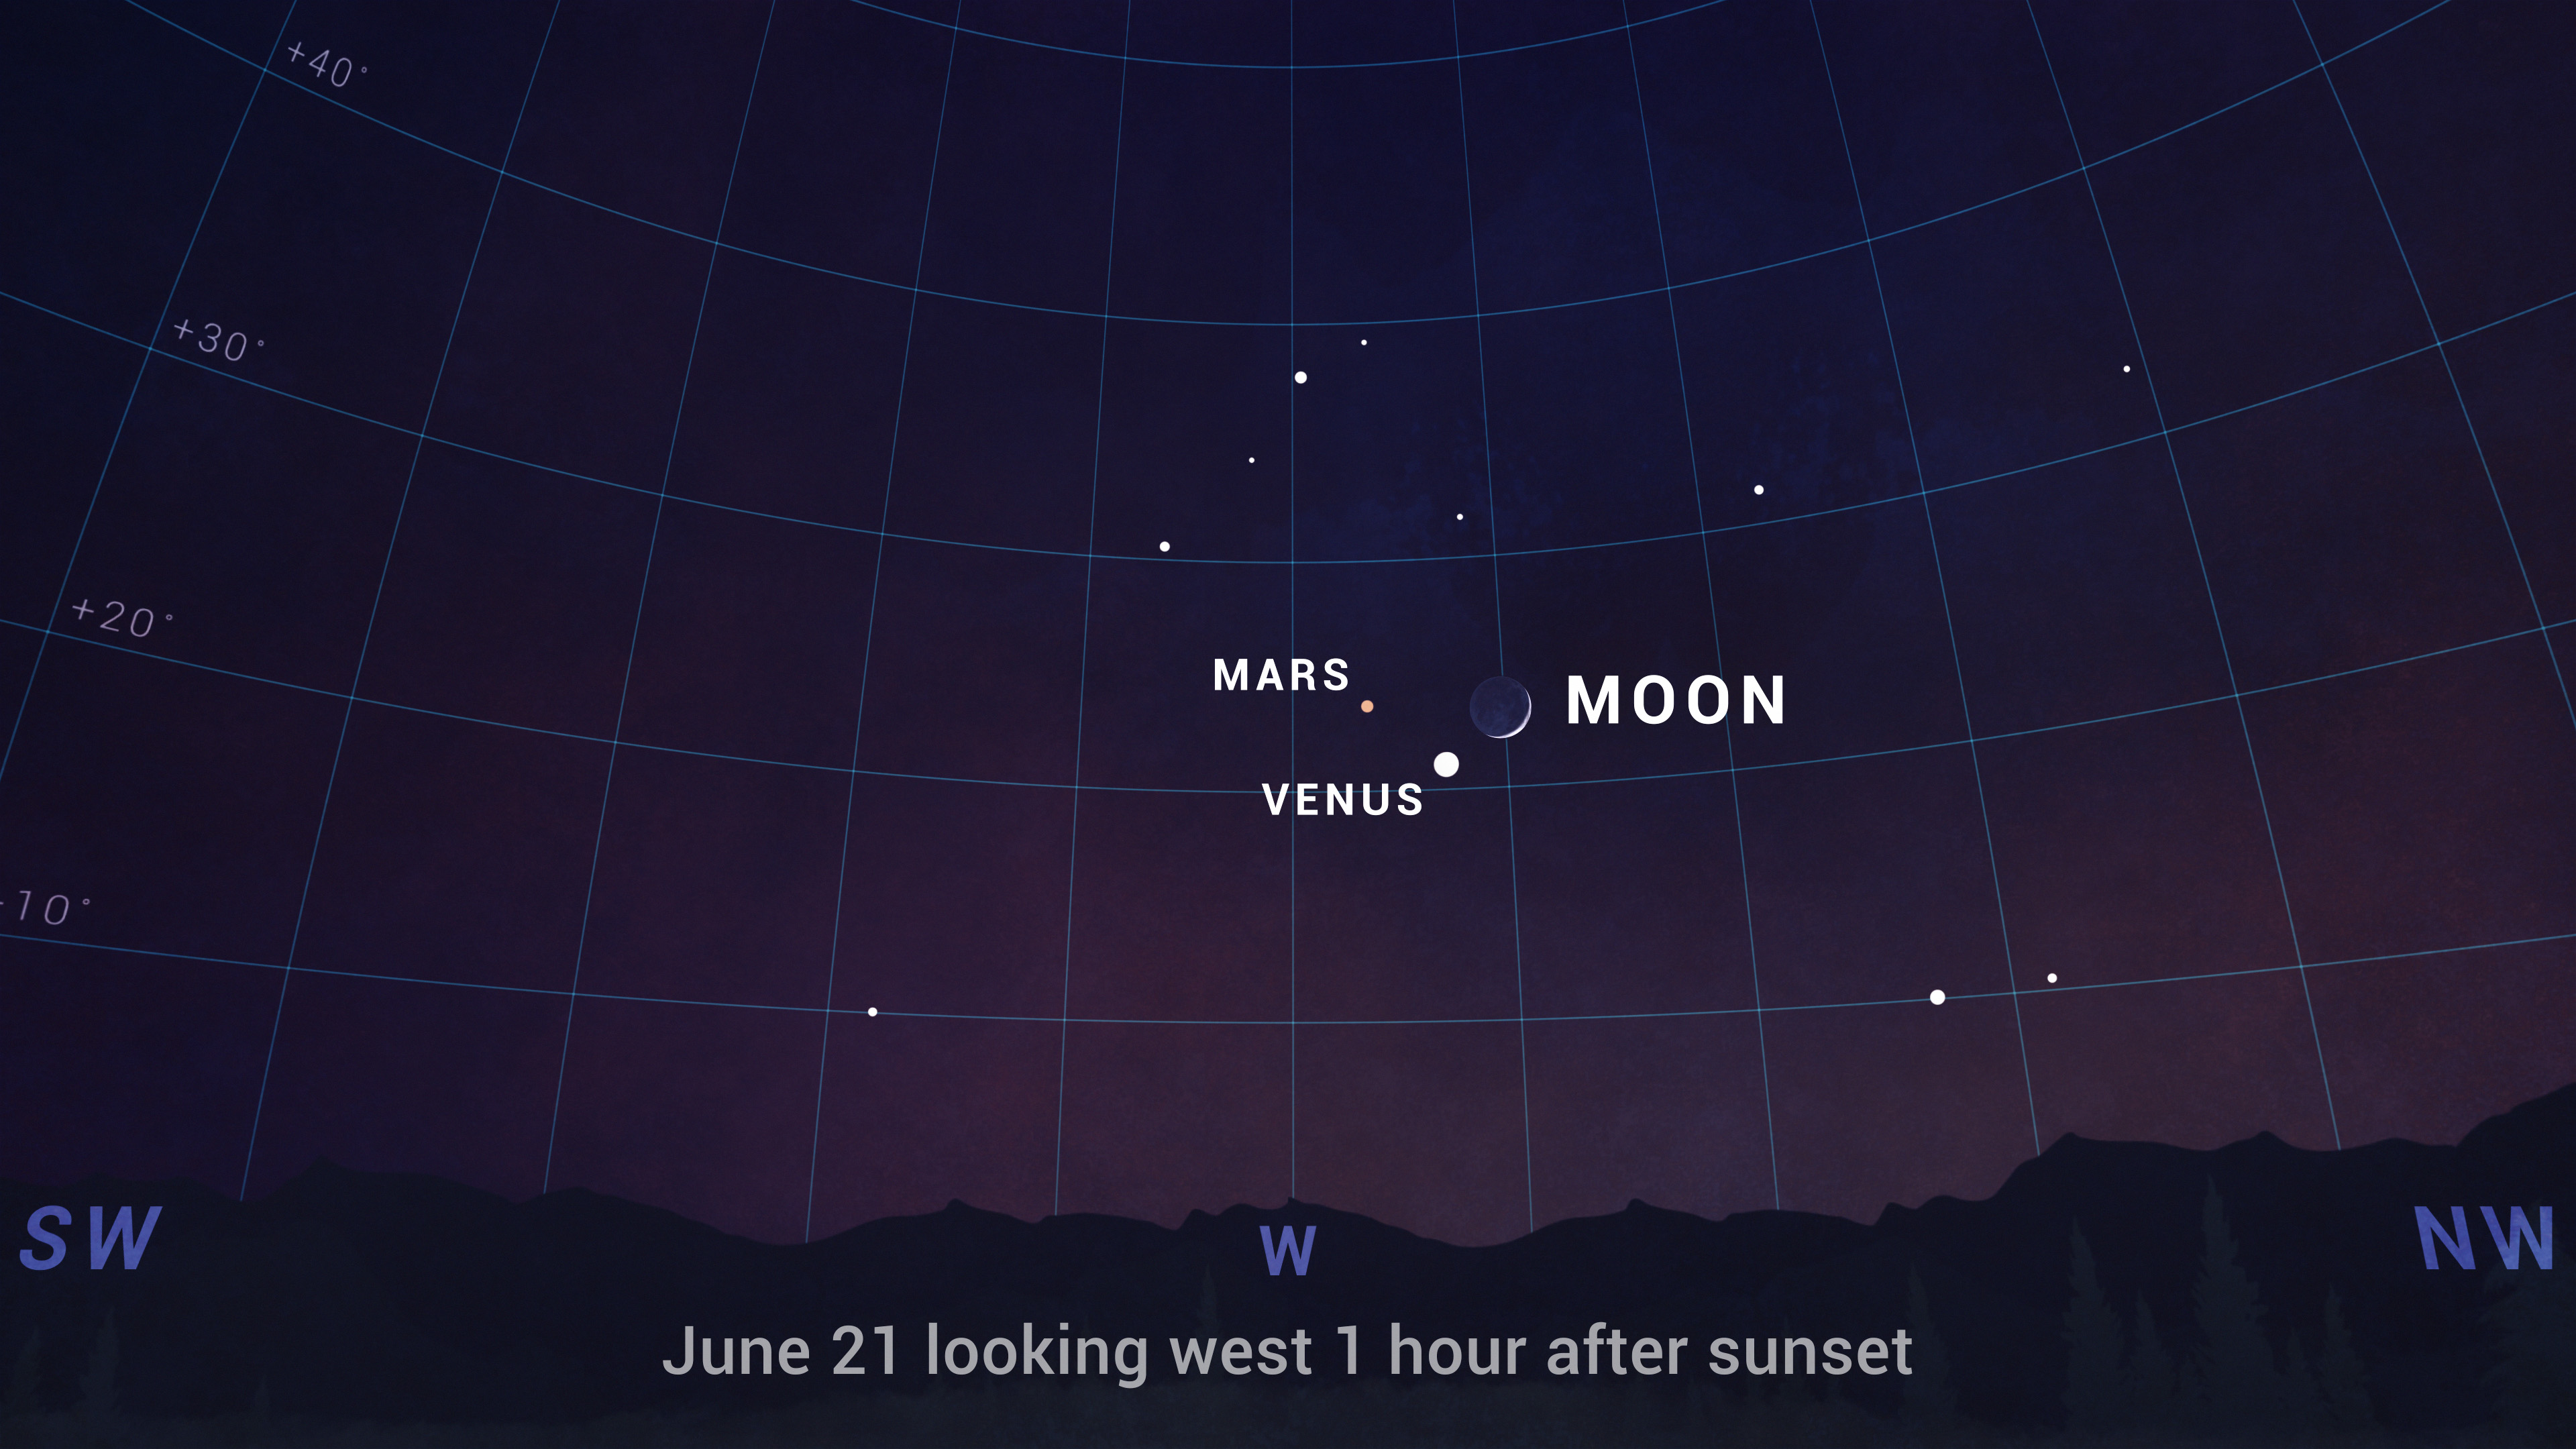 An illustrated sky chart shows the evening sky one hour after sunset on June 21. Mars is a small orange dot near center. Venus is a larger, brighter dot below and to its right. The crescent moon lies just to the right of the pair of planets.